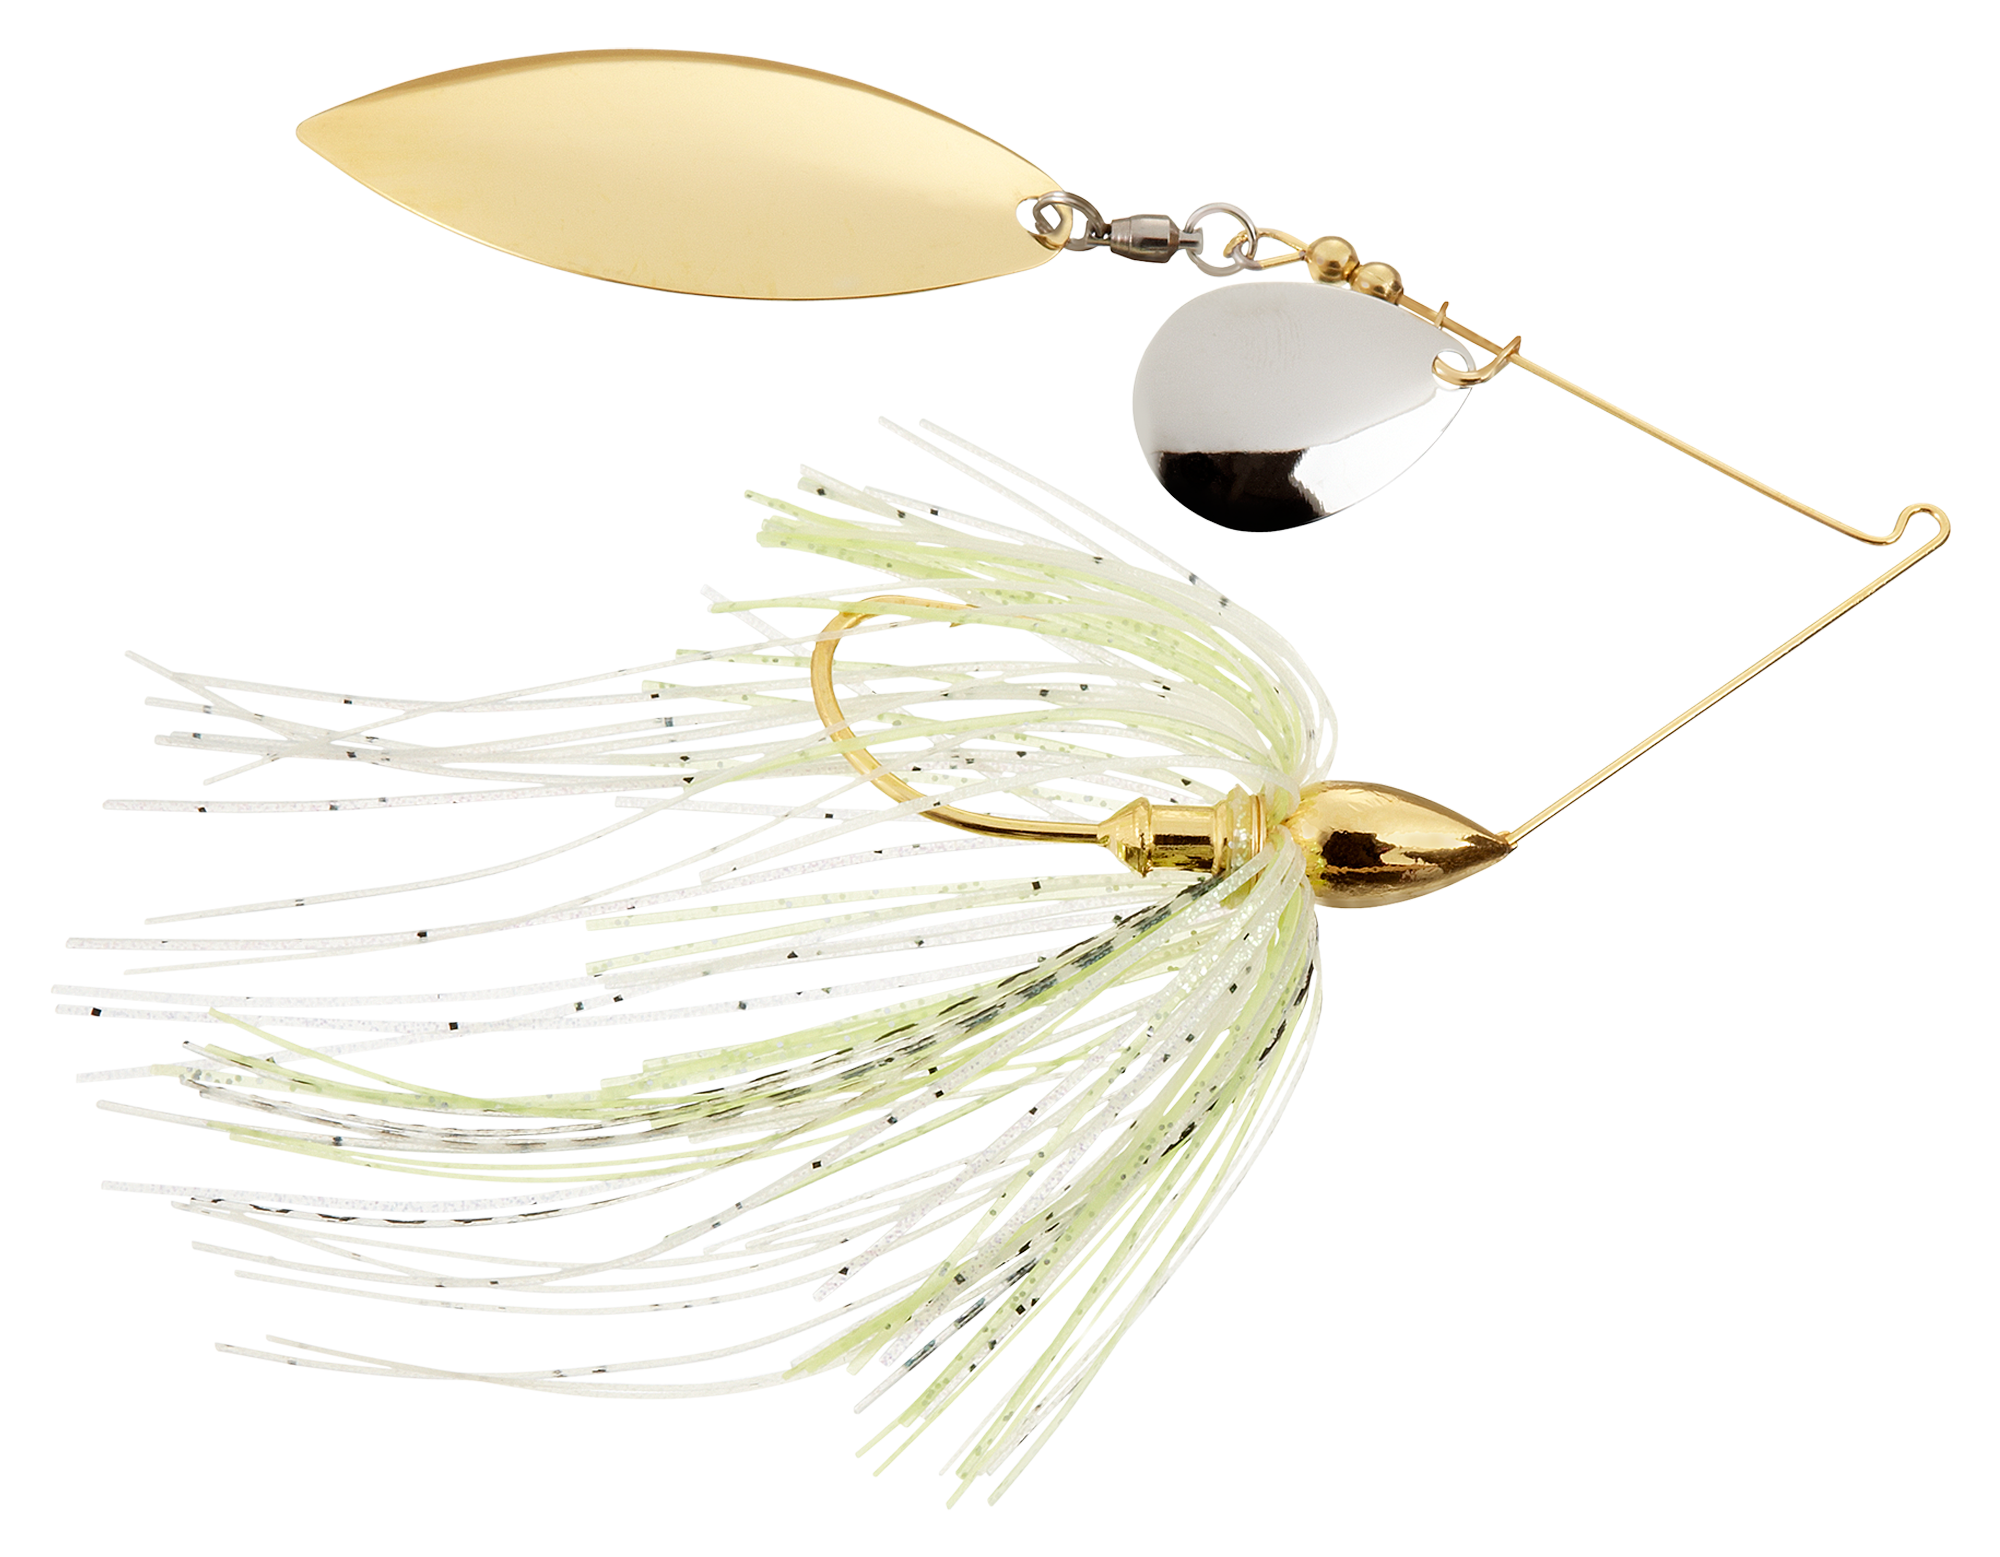 War Eagle Double Willow Spinnerbait